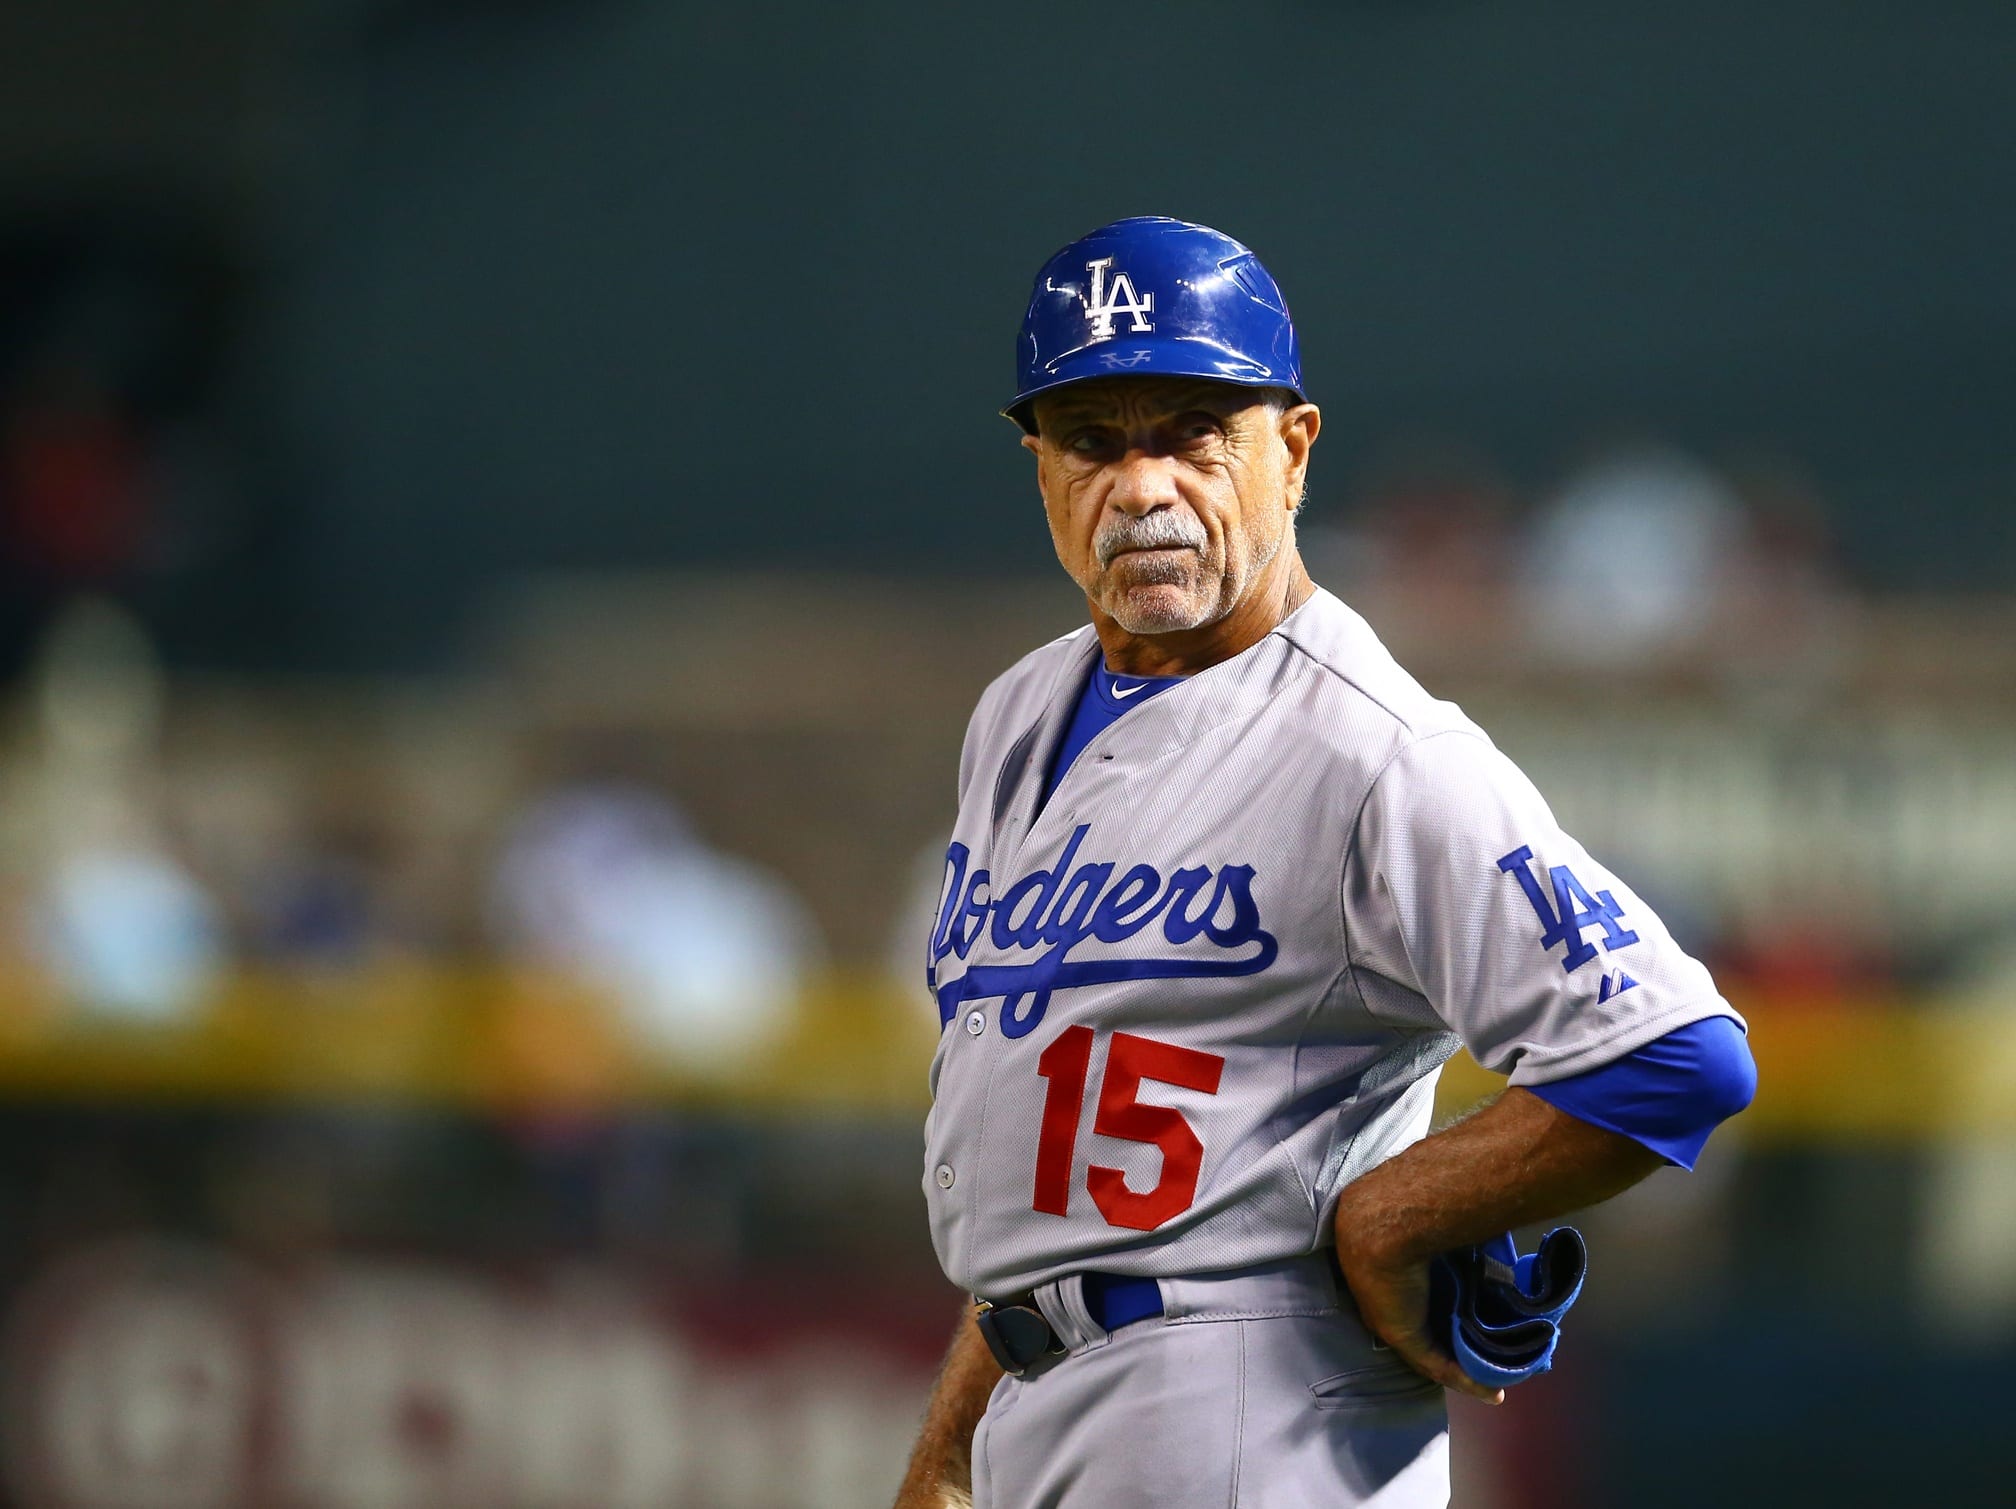 THE PLAYER WHO REPLACED DAVEY LOPES – STEVE SAX – LA Dodger Talk